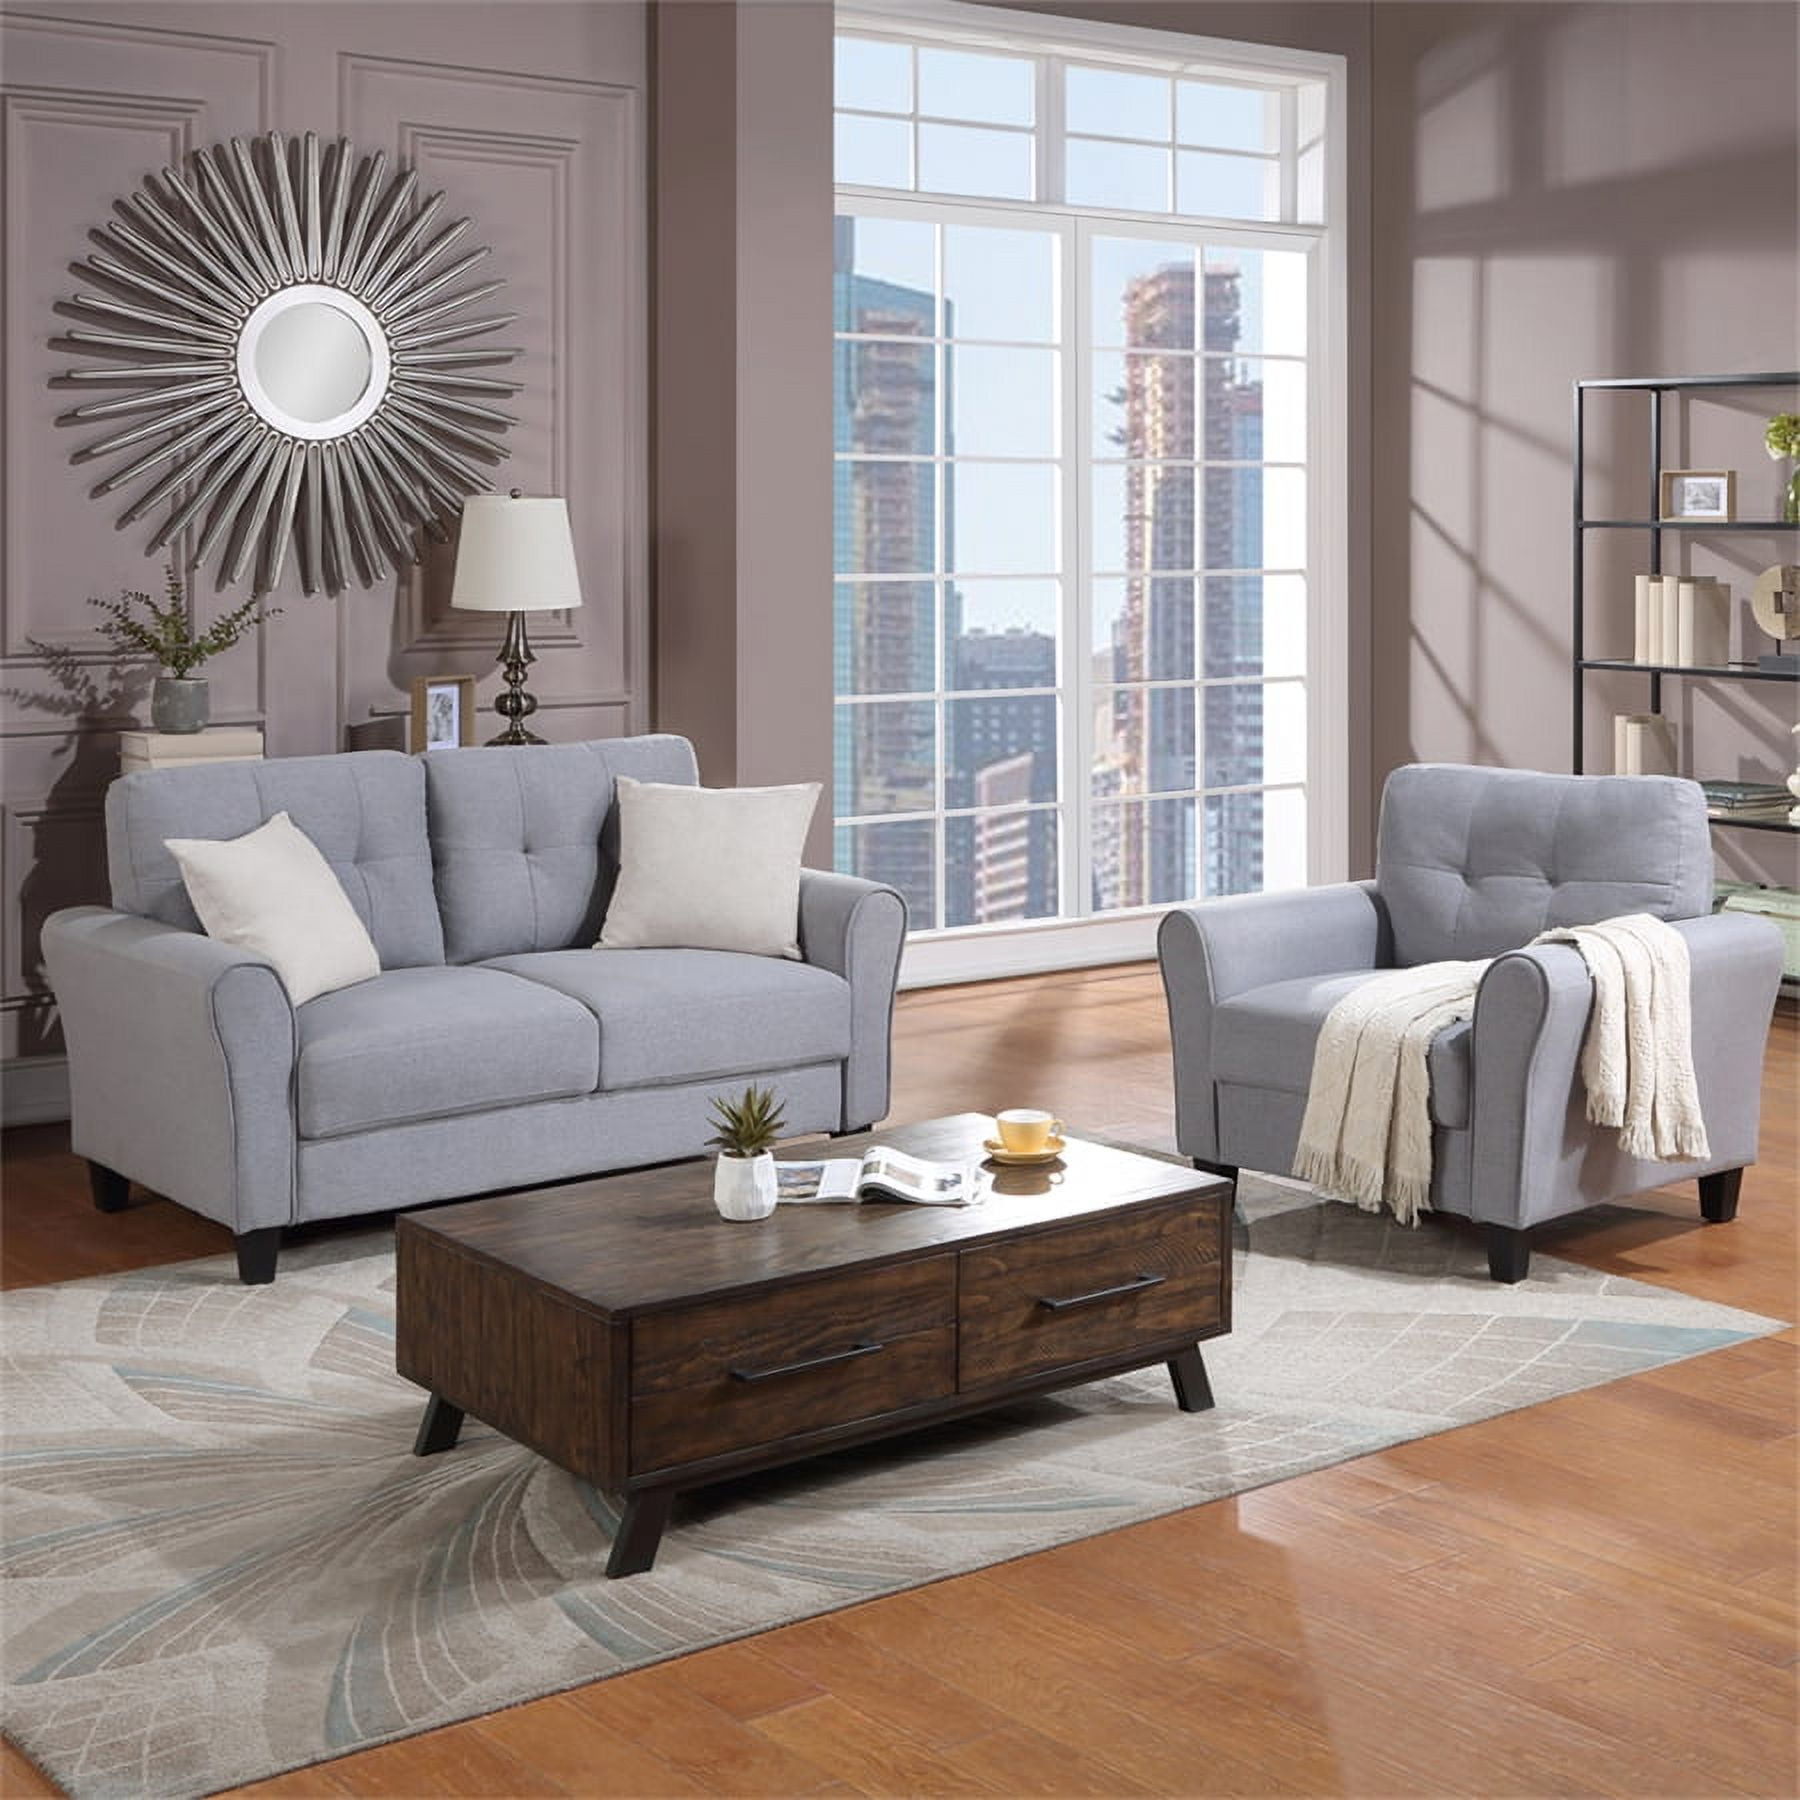 2 Pieces Living Room Sofa Set Single Chair And Loveseat Modern Linen Fabric Upholstered Couch Furniture With Wood Frame For Apartment Office 1 Seat Light Grey Blue